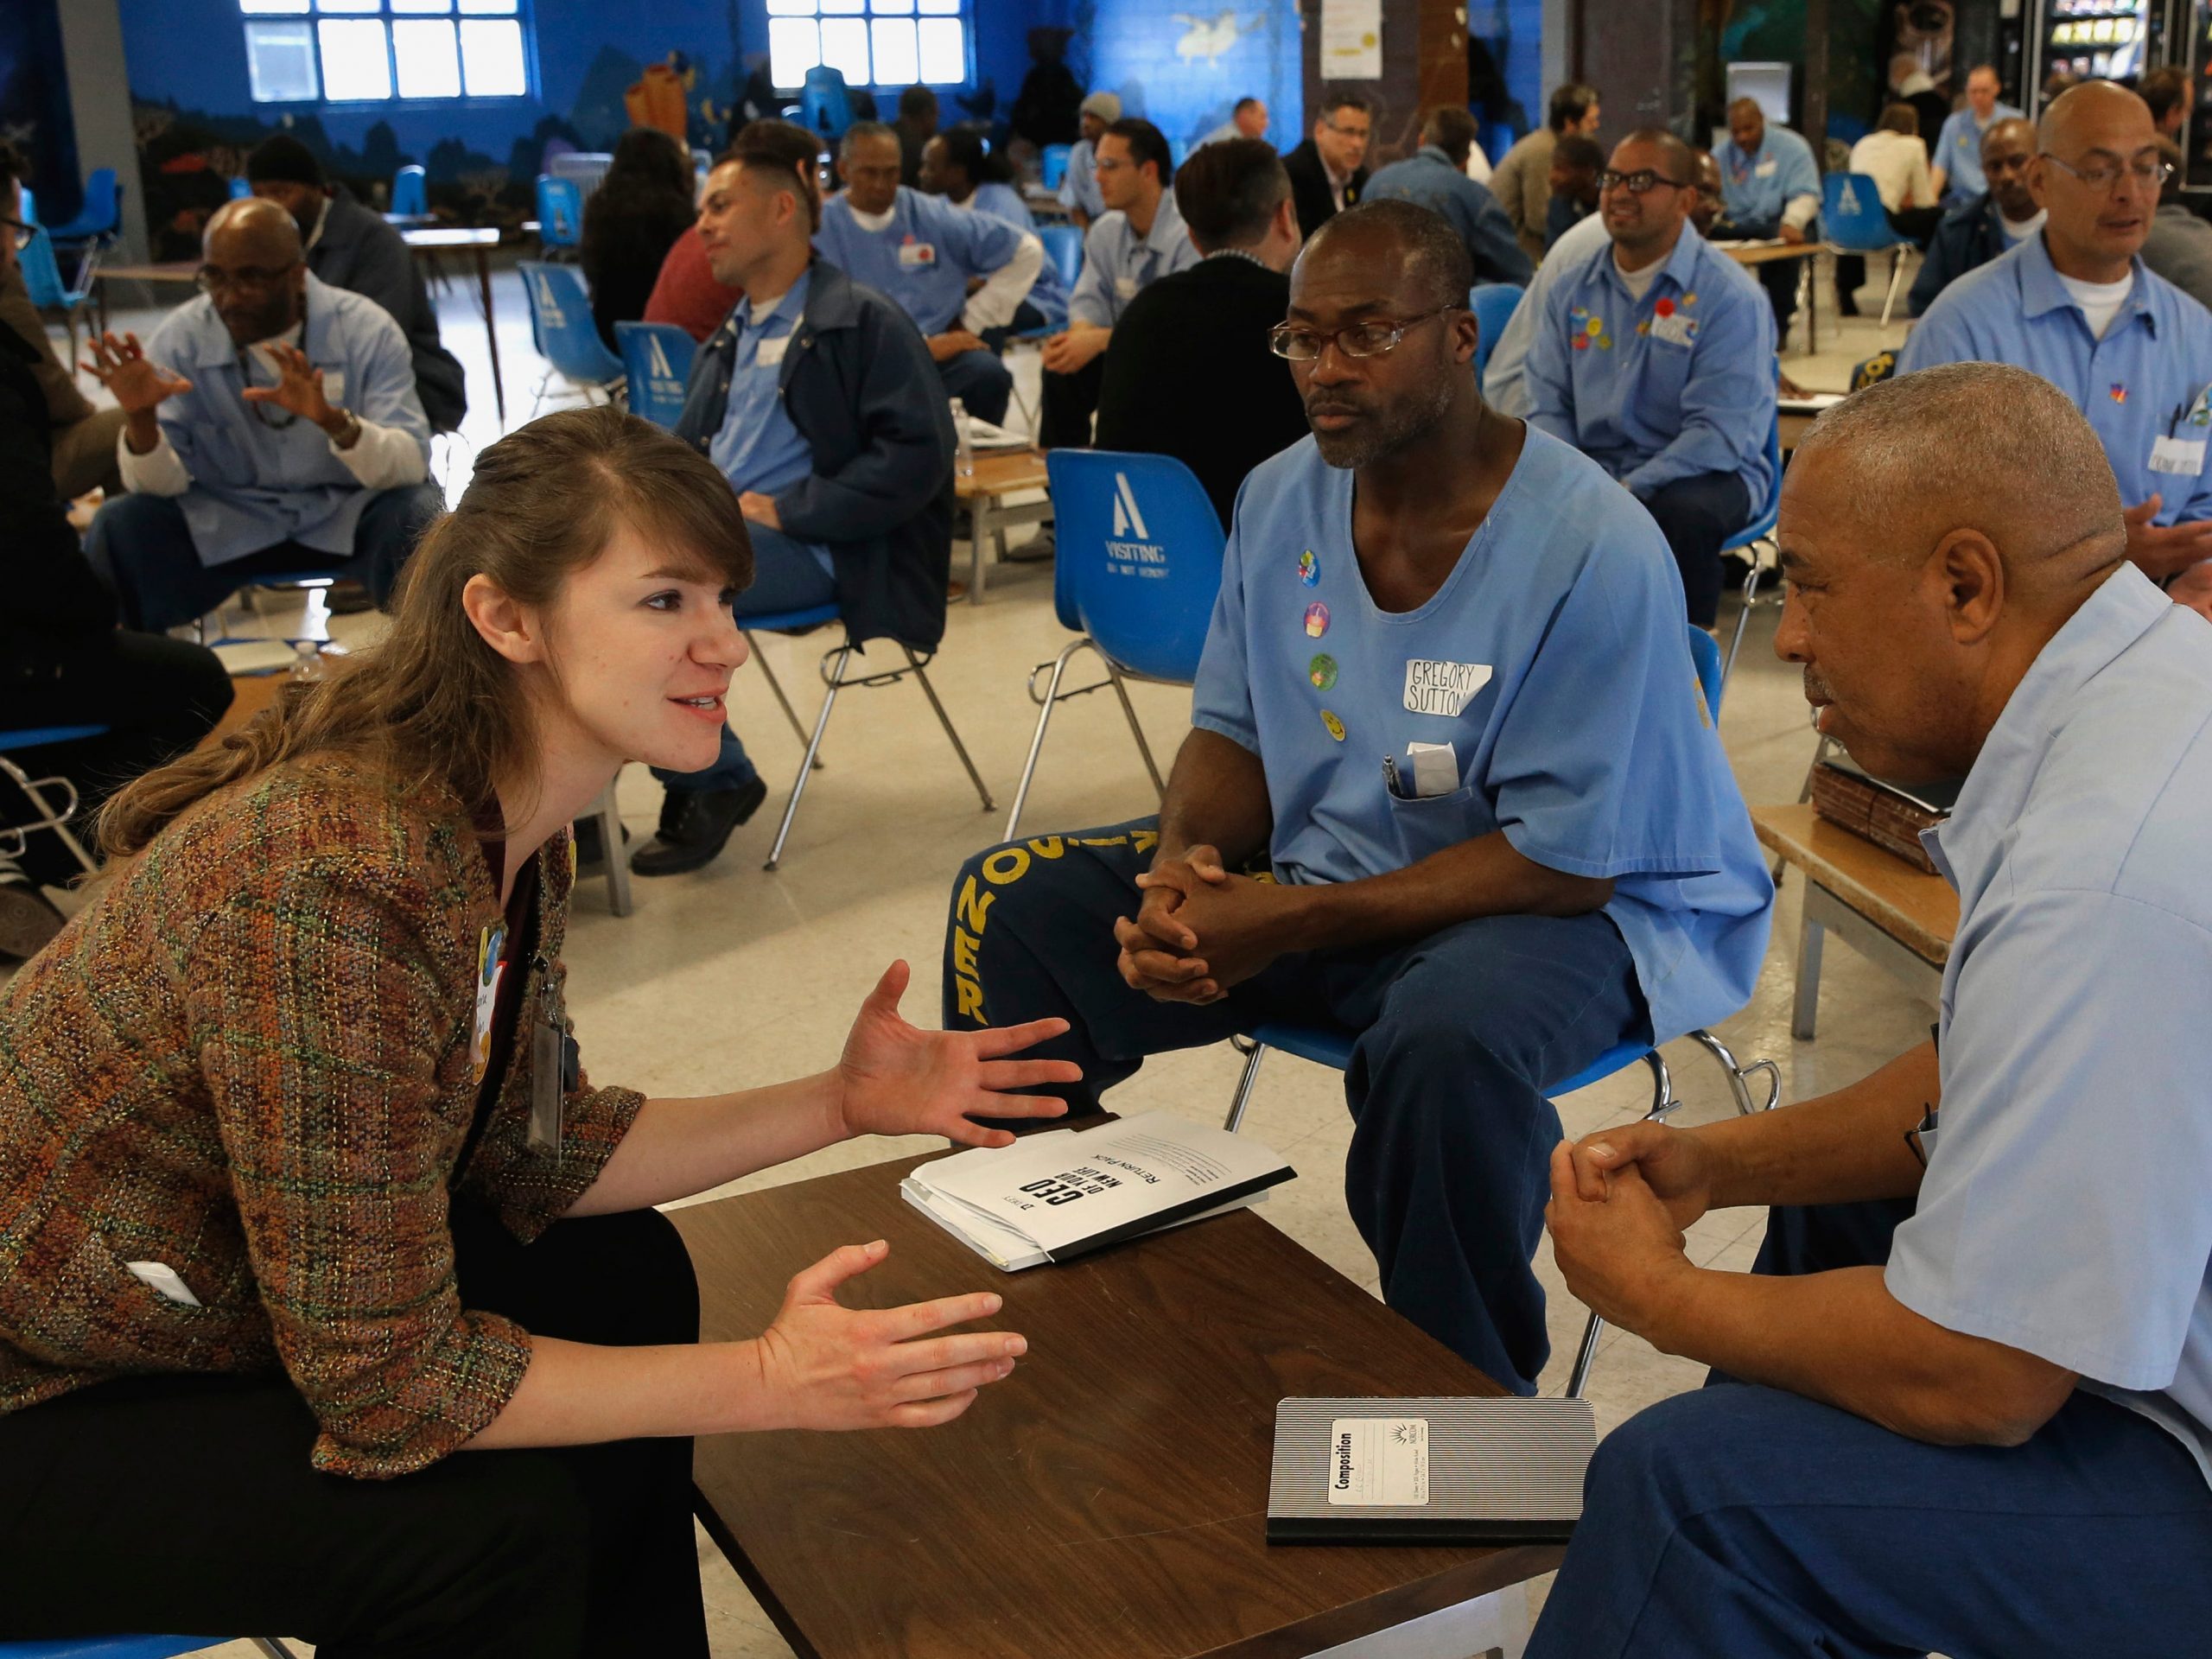 Volunteer Bianna Walden mentors students Gregory Sutton, (center) and Charles Commings, as Defy Ventures holds a business pitch competition for prisoners enrolled in the entrepreneurs in training program, at Solano State Prison in Vacaville, California in 2015.